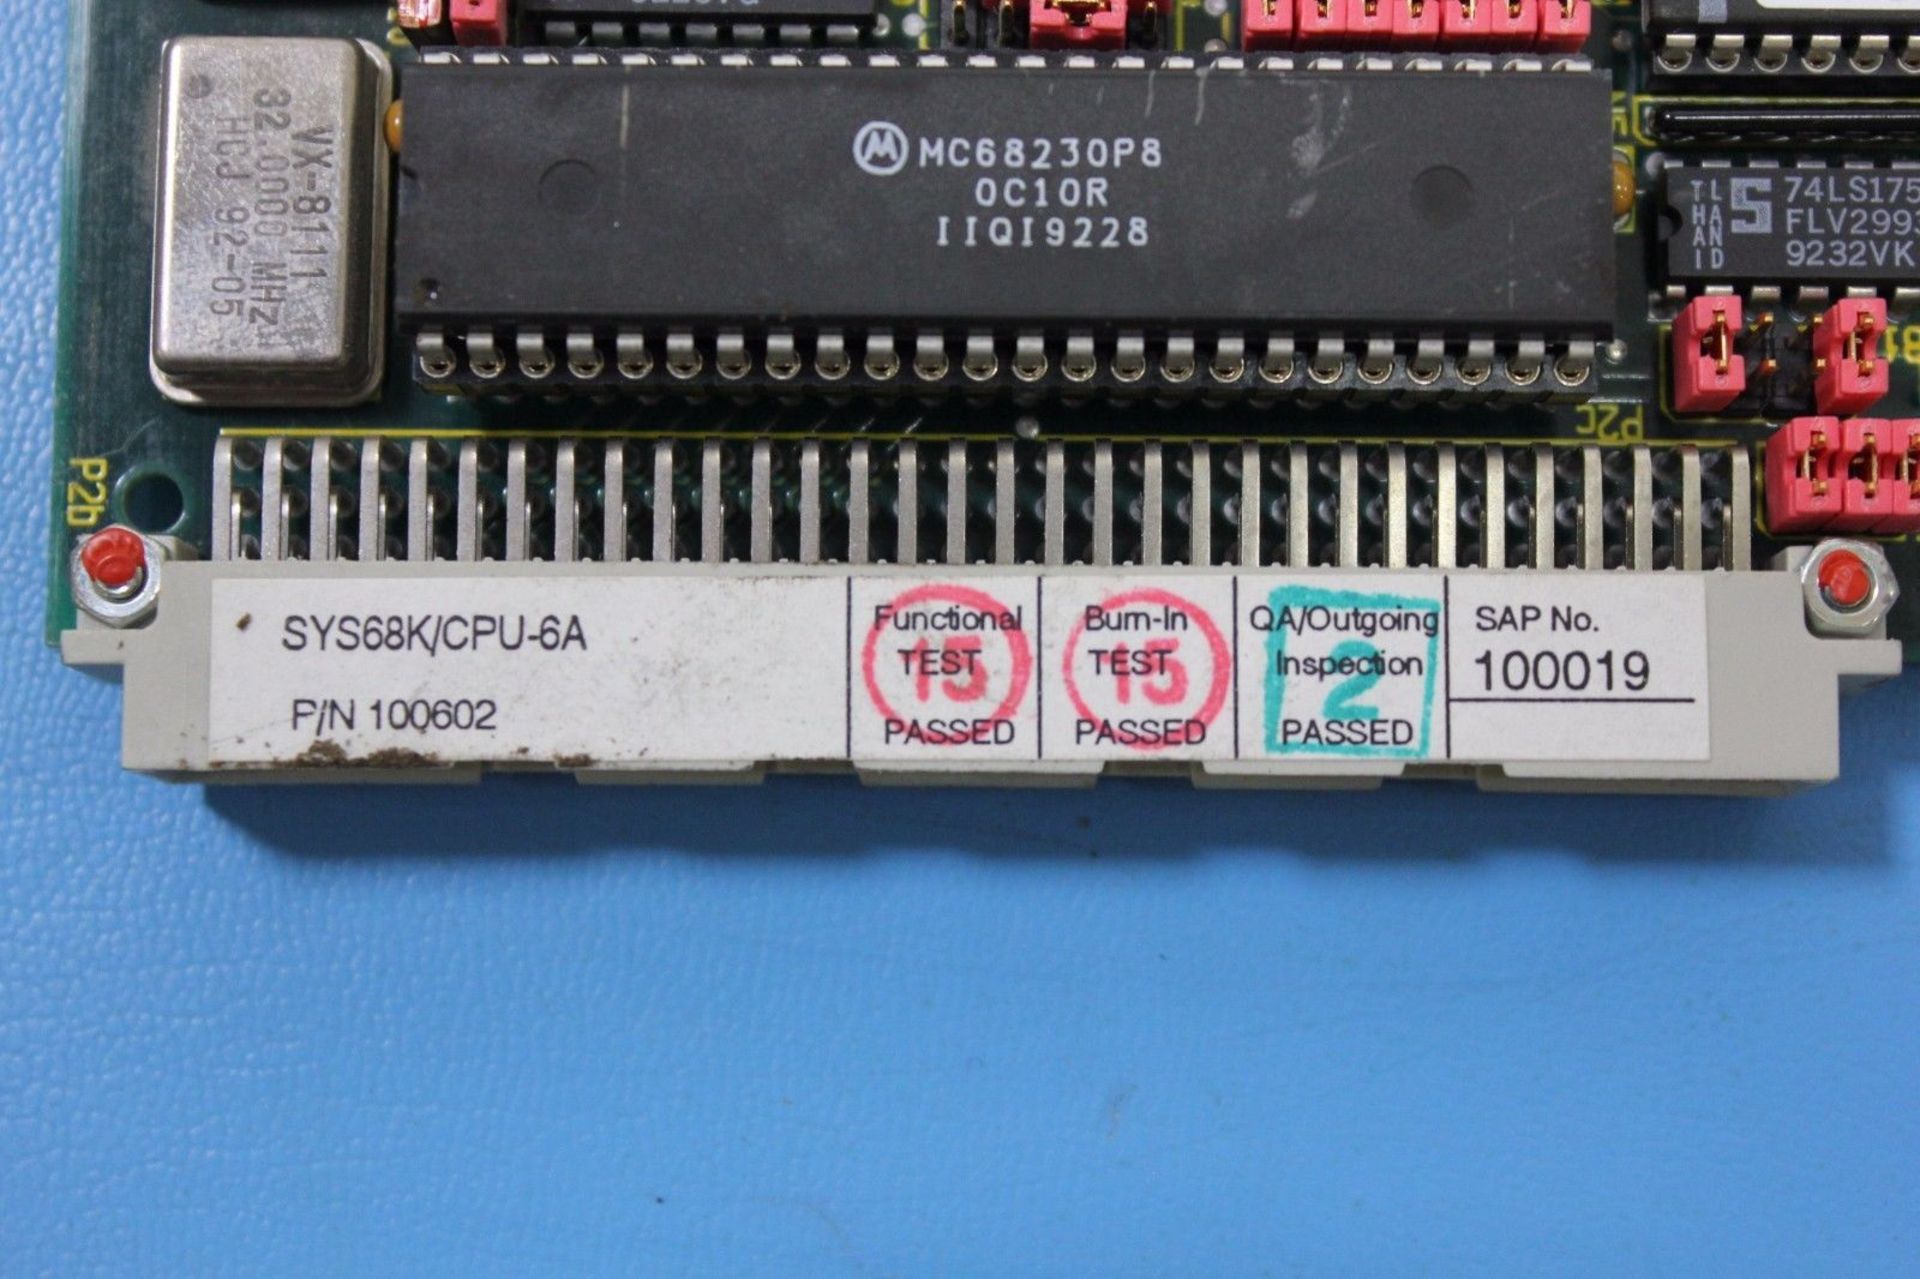 Force SYS68K CPU-6A Vme Cpu Board - Image 3 of 3